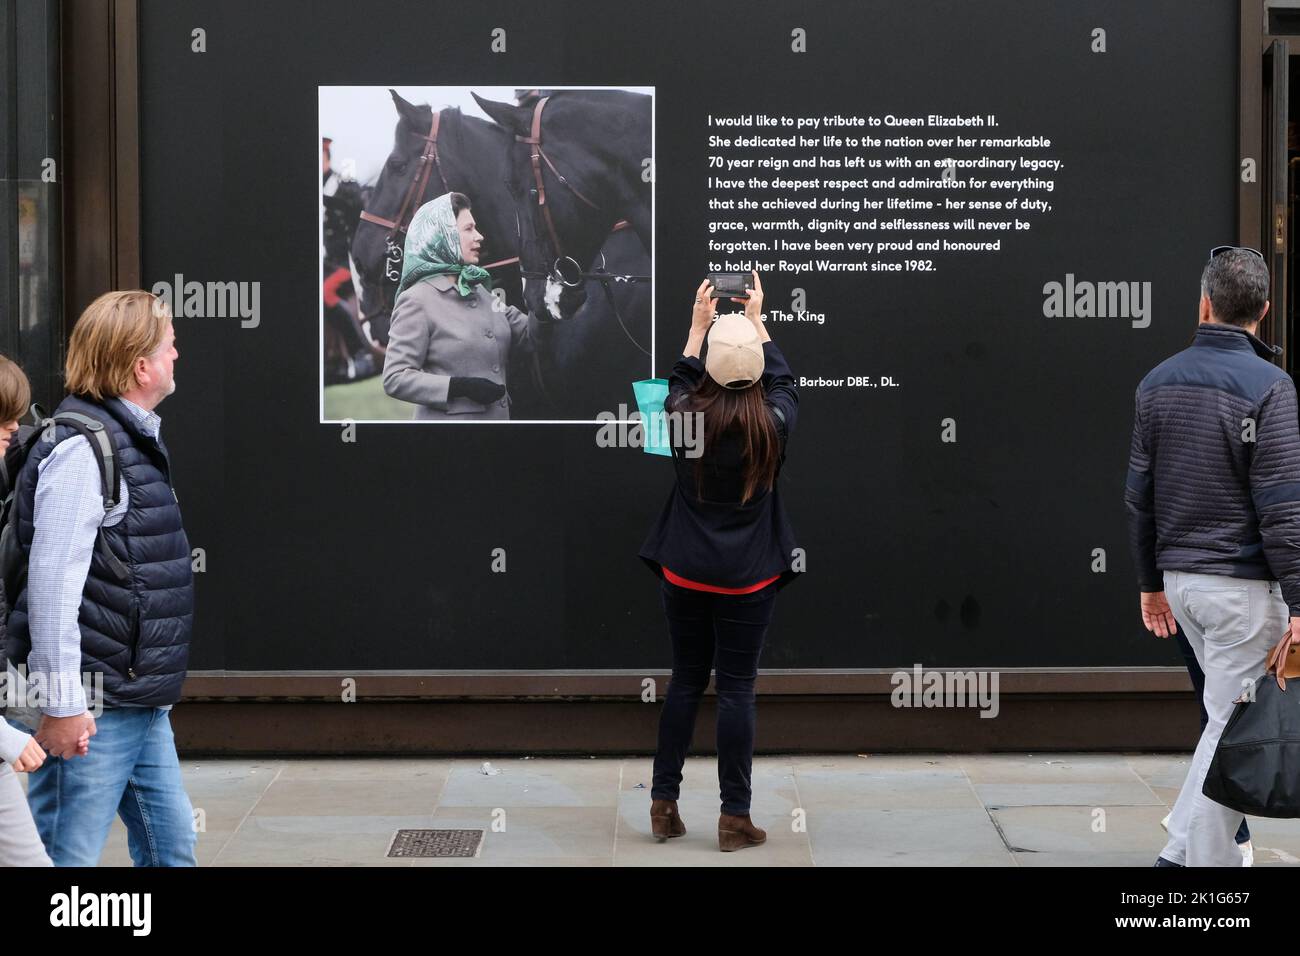 Piccadilly, London, UK. 18th Sept 2022. Mourning the death of Queen Elizabeth II aged 96. Shop windows near Piccadilly display pictures and dedications to Queen Elizabeth. Barbour. Credit: Matthew Chattle/Alamy Live News Stock Photo